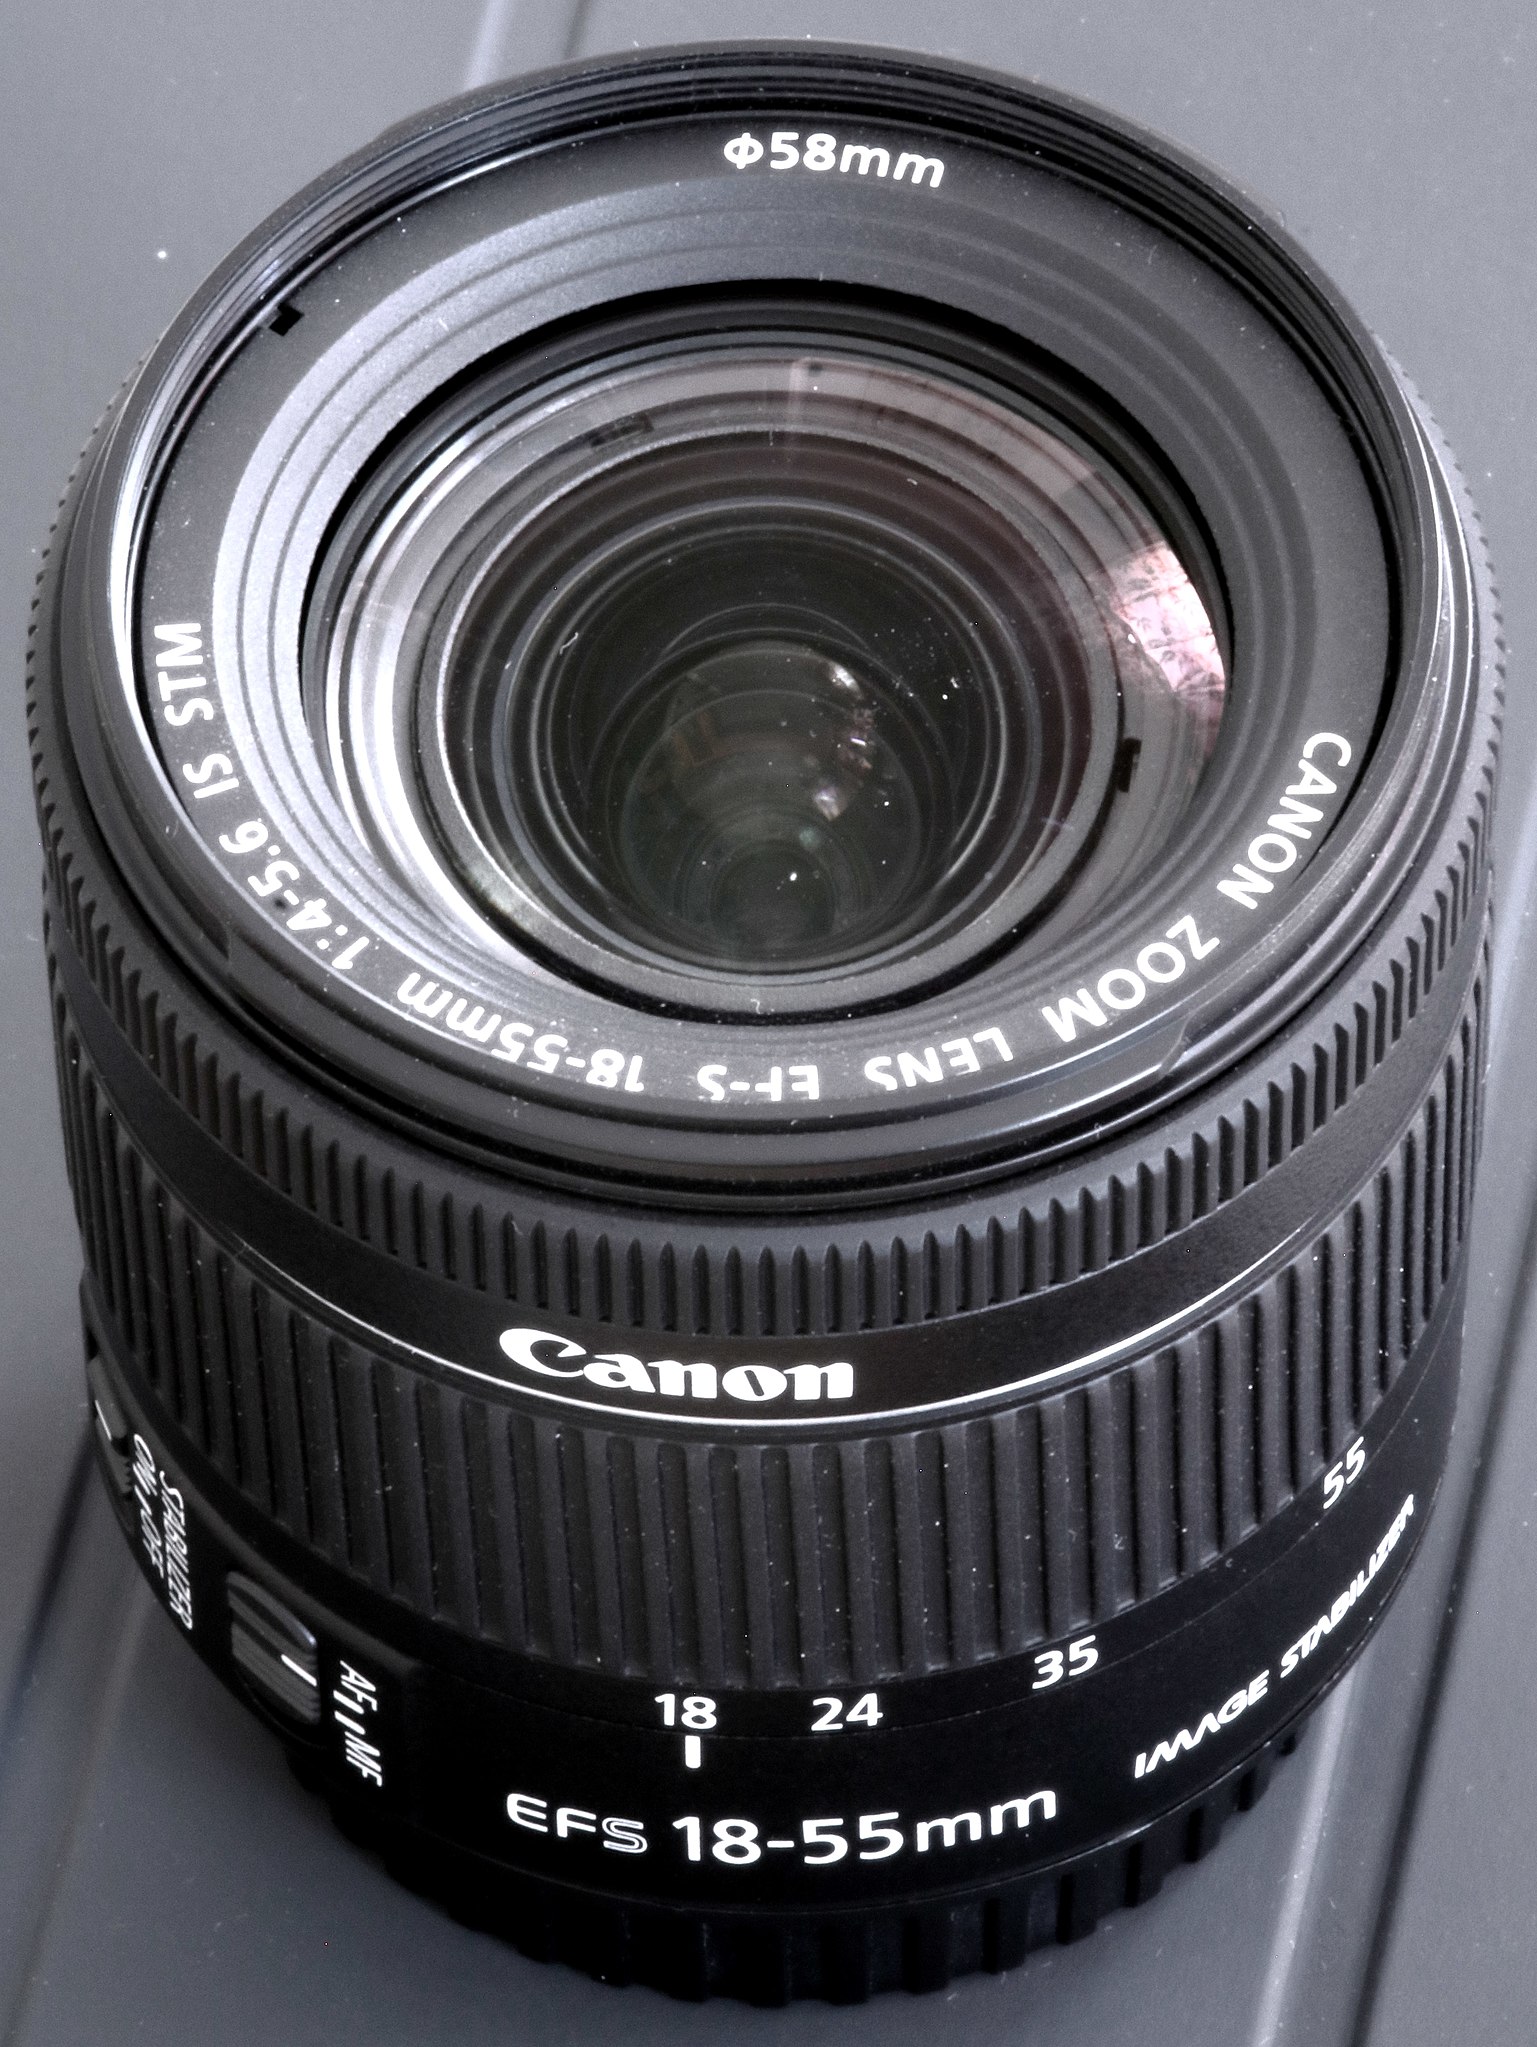 File:Canon EF-S 18-55mm F4-5.6 IS STM.jpg - Wikipedia